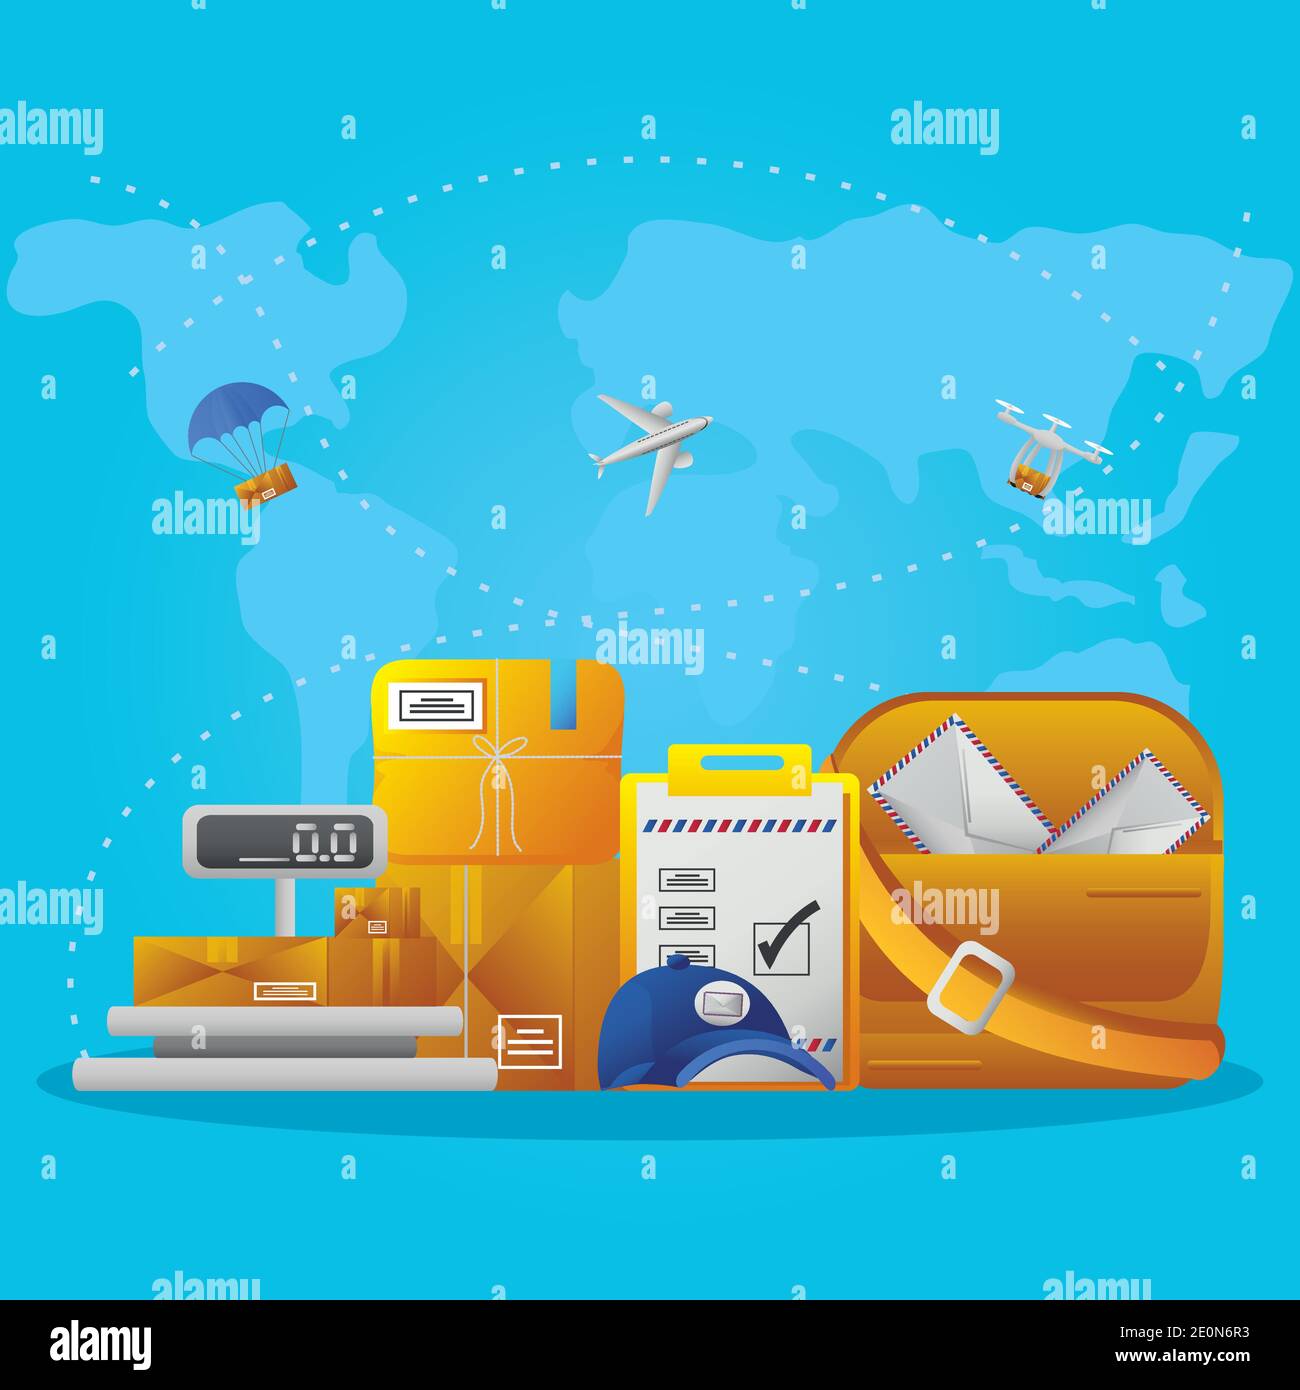 https://c8.alamy.com/comp/2E0N6R3/postal-service-weight-scale-packages-mail-bag-cardboard-boxes-logistic-and-transport-on-blue-map-background-vector-illustration-2E0N6R3.jpg